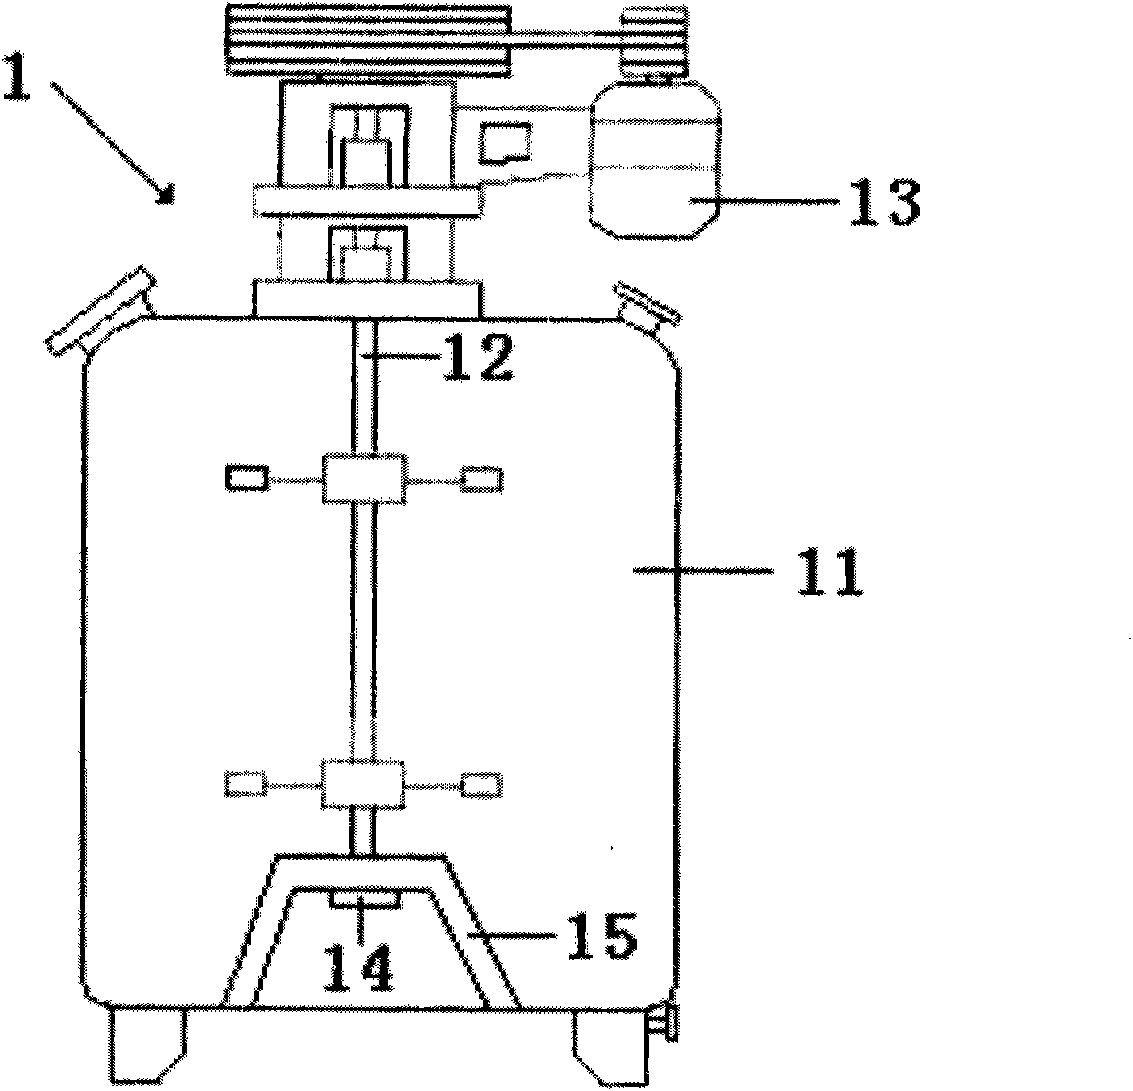 Magnetic stirring bioreactor and magnetic stirring system